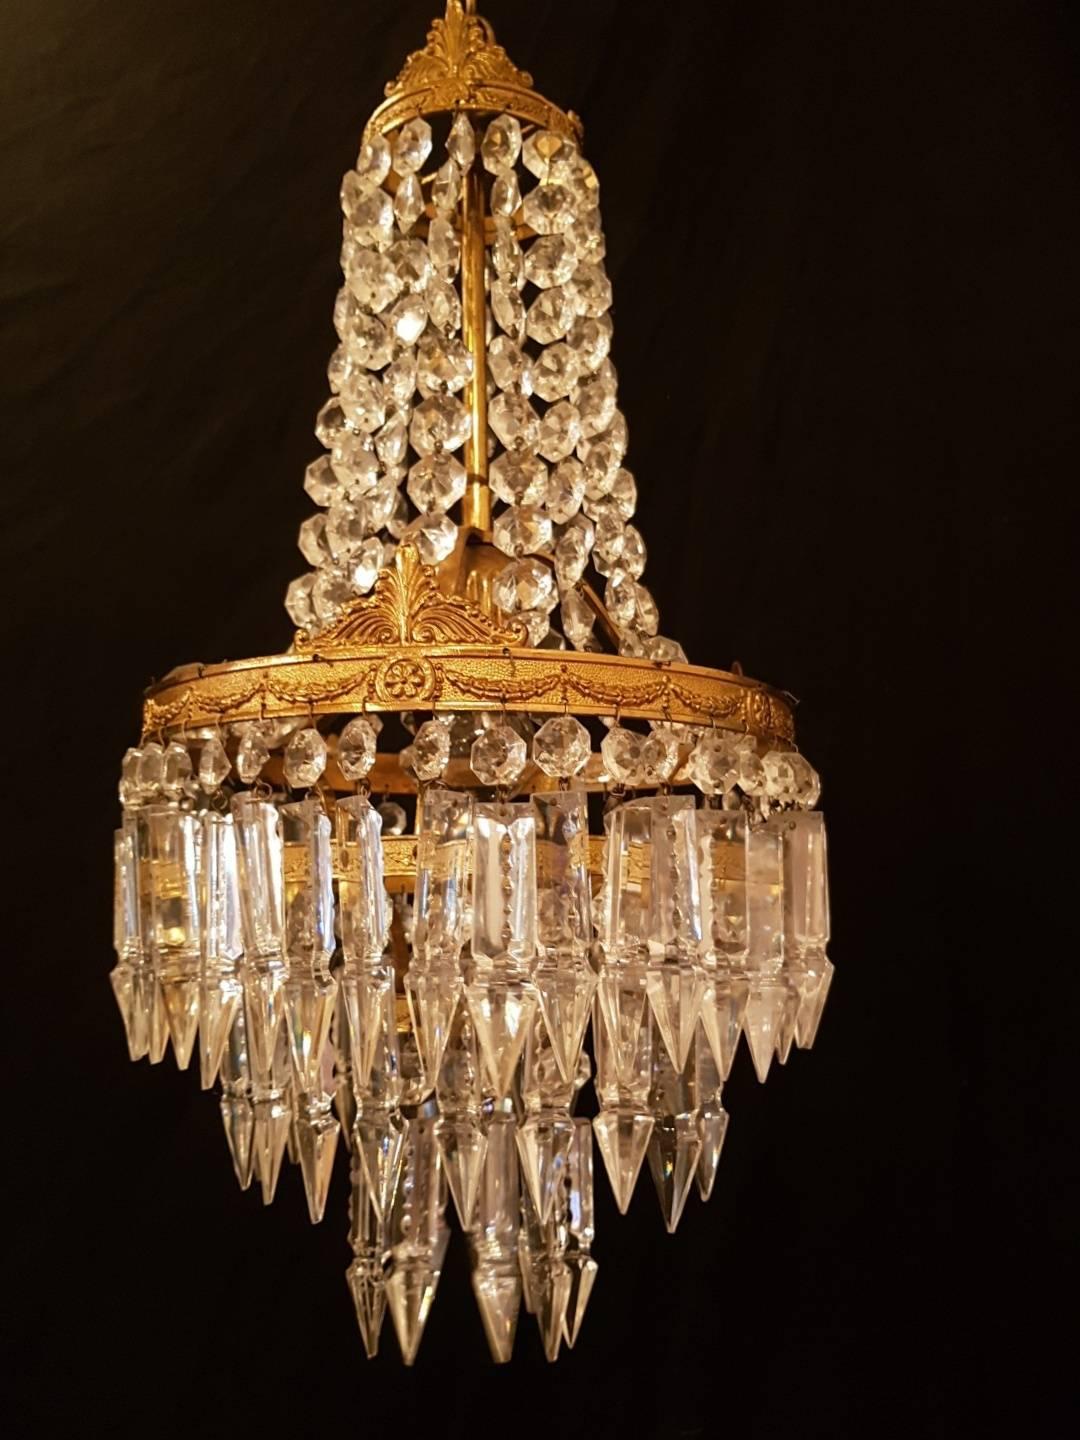 Set of two bronze chandeliers in sac a perle style.

This is just one of our large collection chandeliers. Besides the old and antique chandeliers we have beautiful series of new large chandeliers in the Marie Therese style.